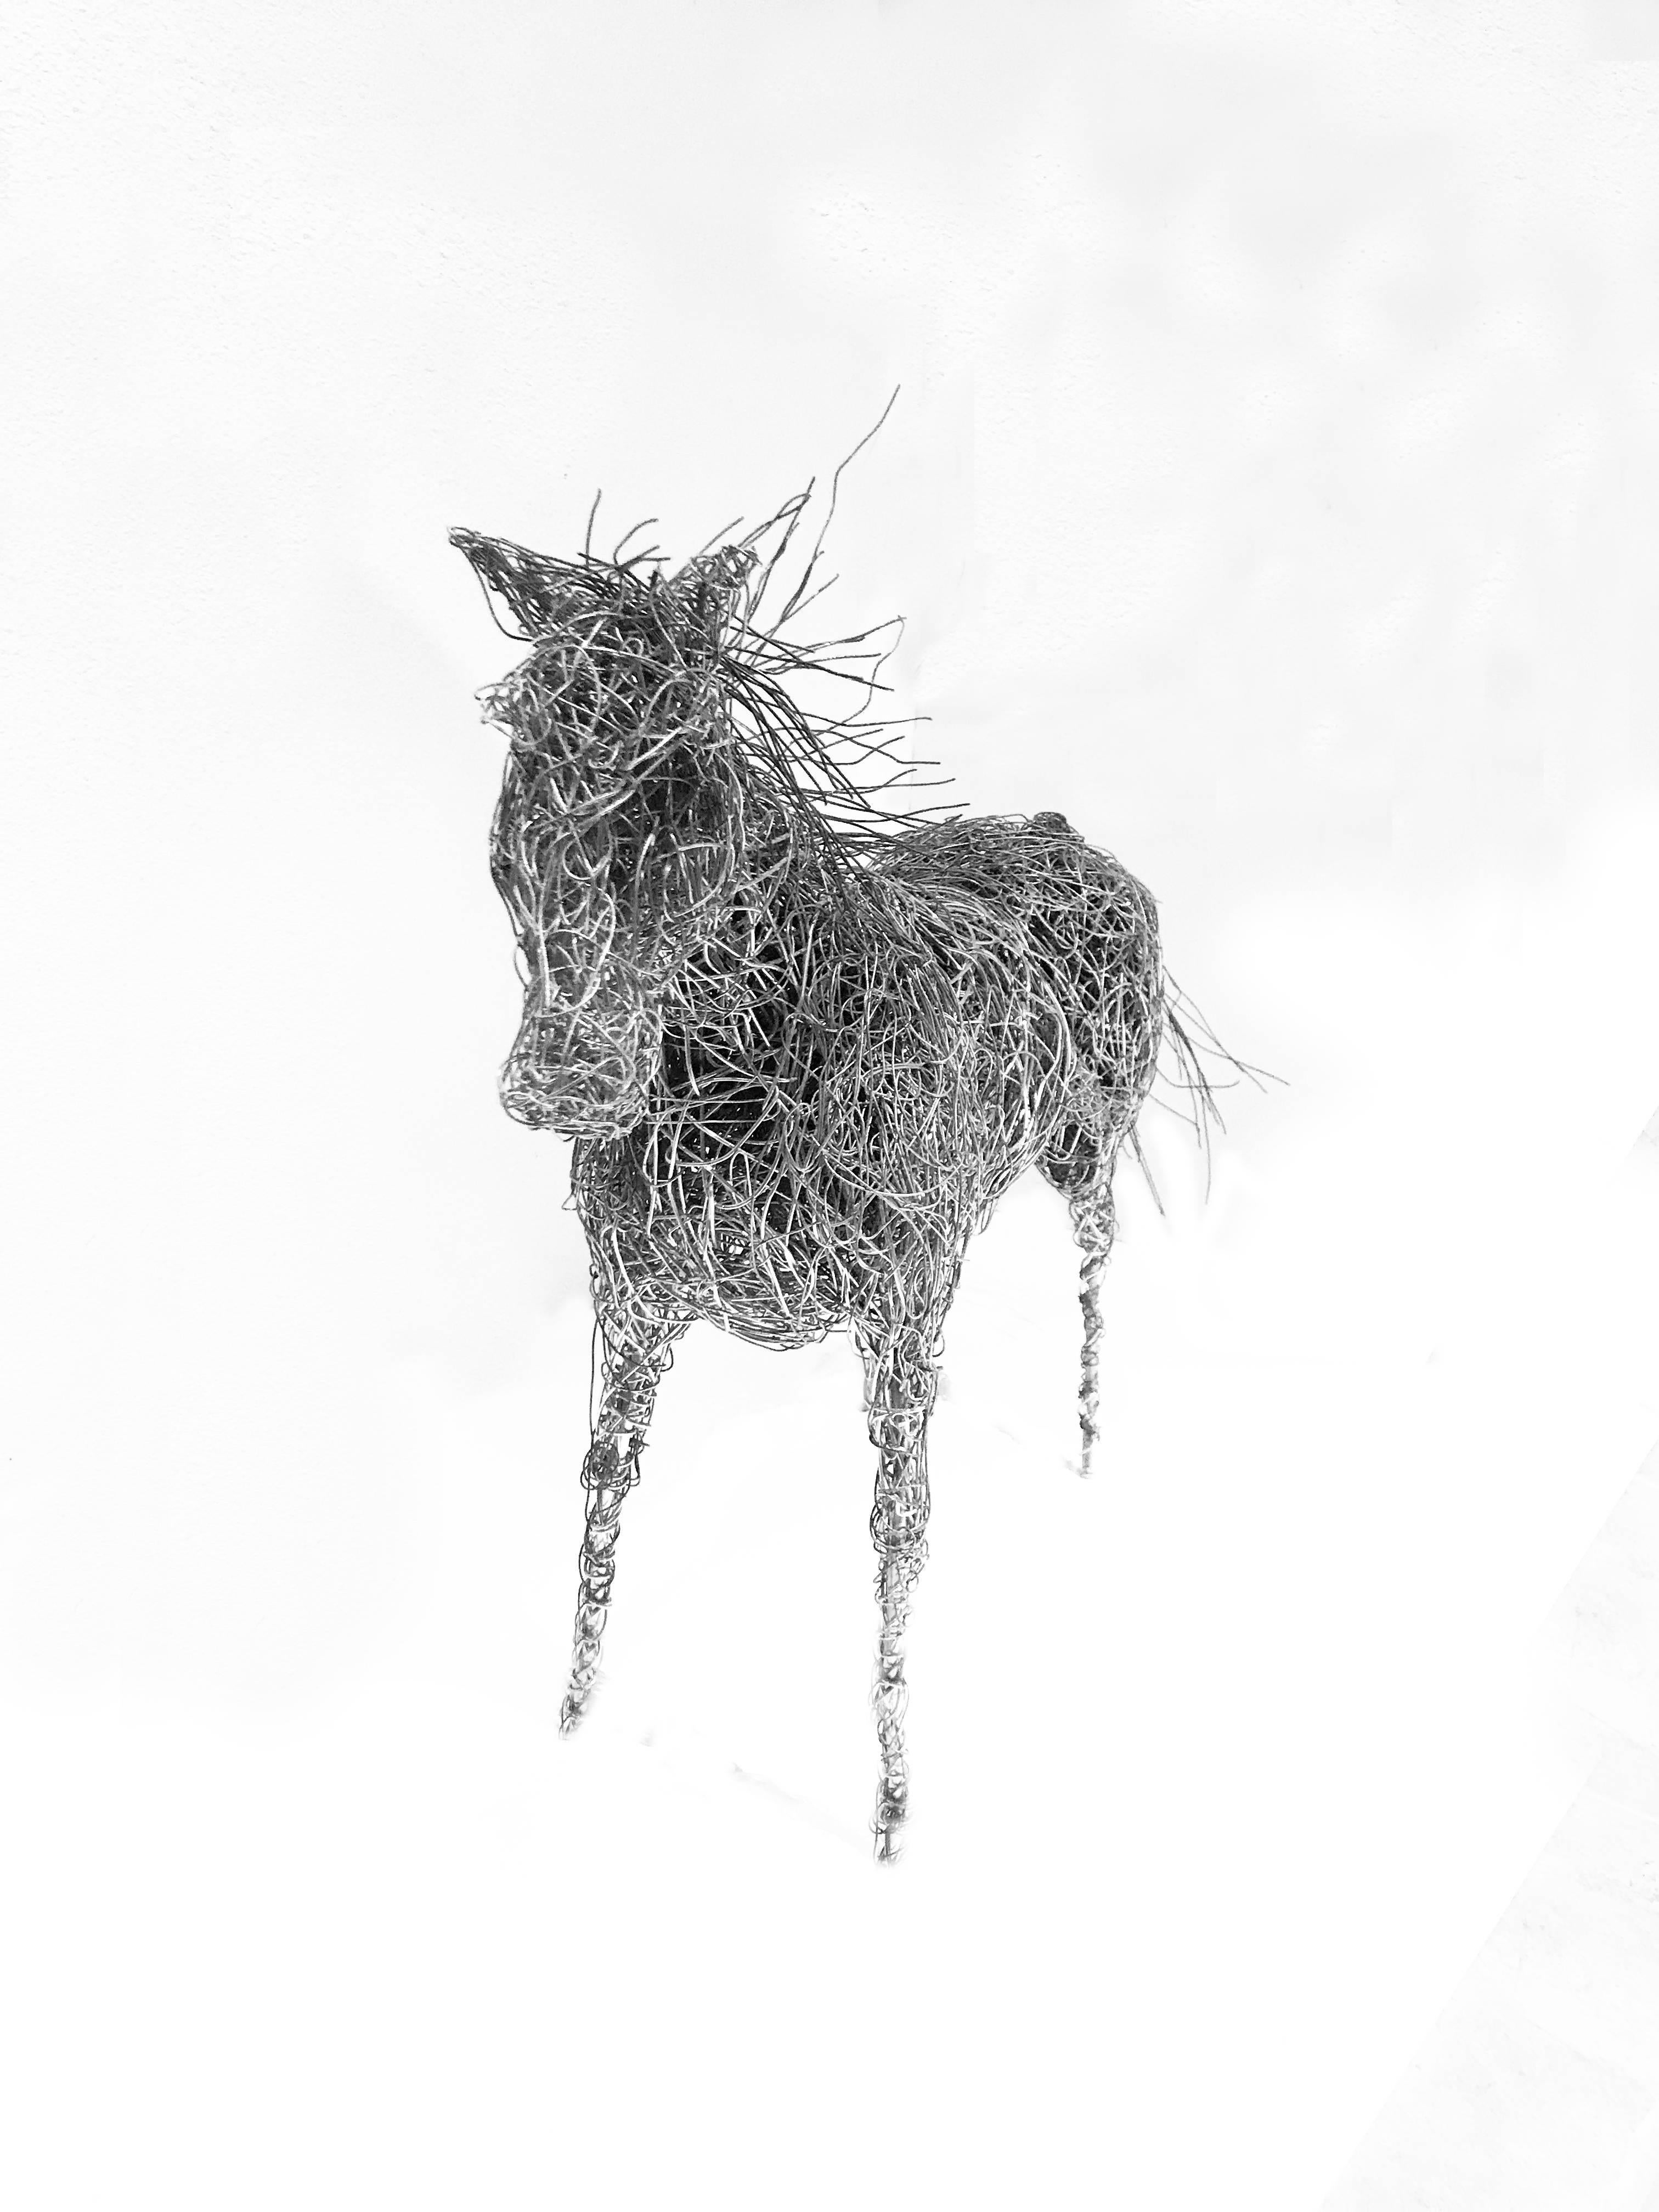 Artist Bob Tuffin is a highly collected sculptor better known for his extraordinary lifesize wire sculptures of people that are carried in museums throughout the U.S. and Europe. He also created life sized wire animals, like this smaller wire horse